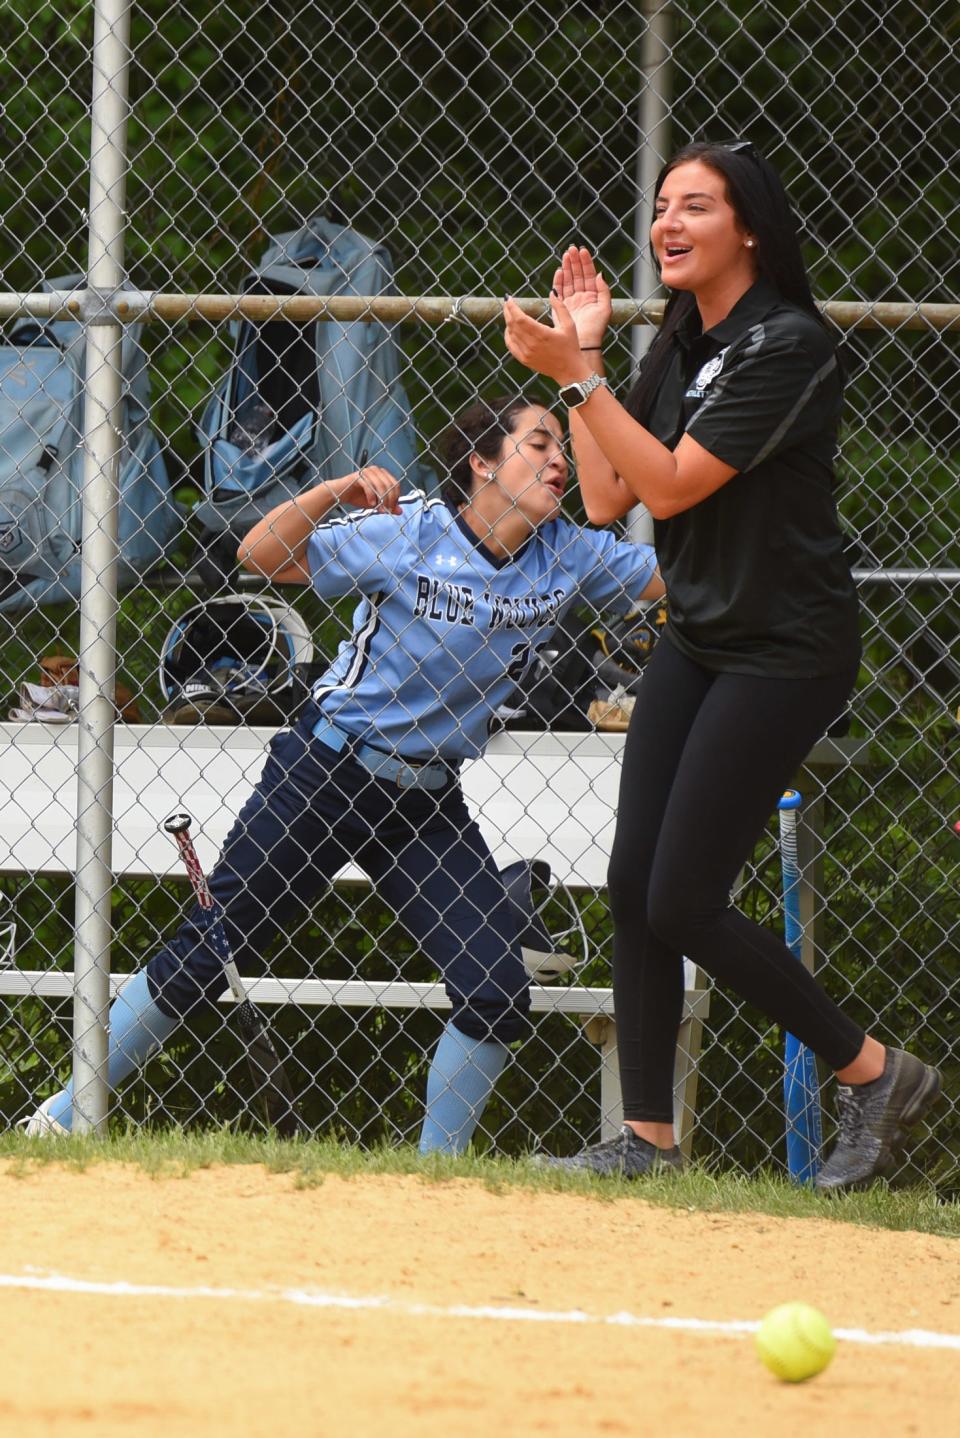 Immaculate Conception's softball team is coached by alum Sarah Piening, seen here cheering her team on during the NJSIAA Non-Public B softball semifinal against Morris Catholic last May.